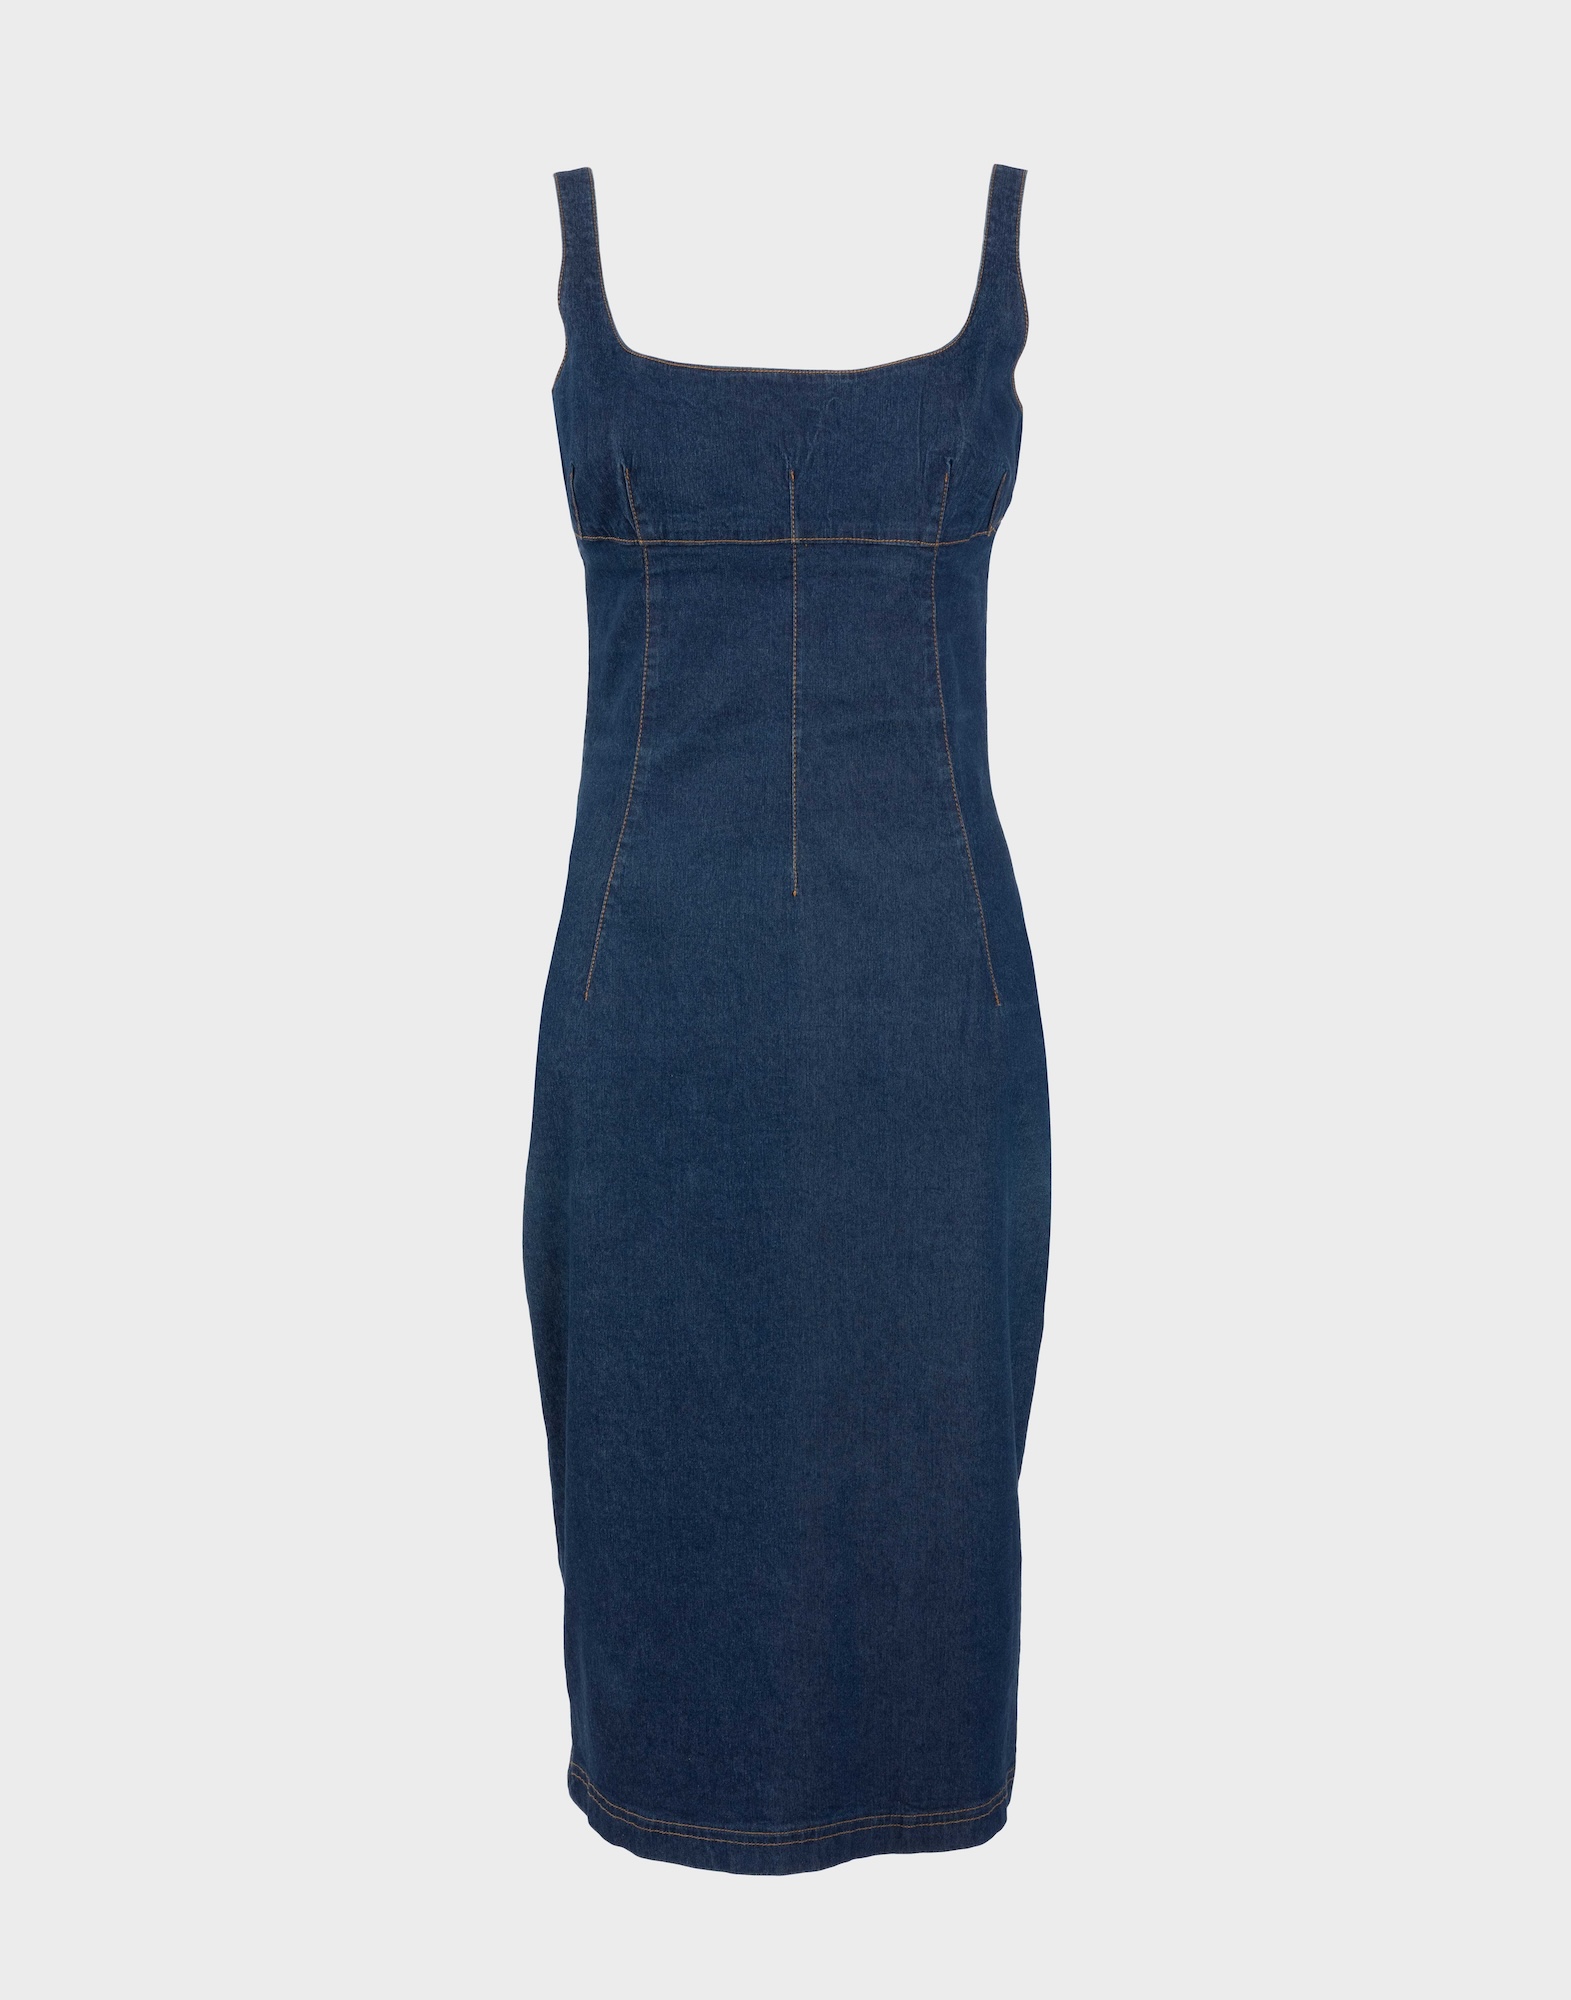 women's long denim dress with thin straps, contrast stitching